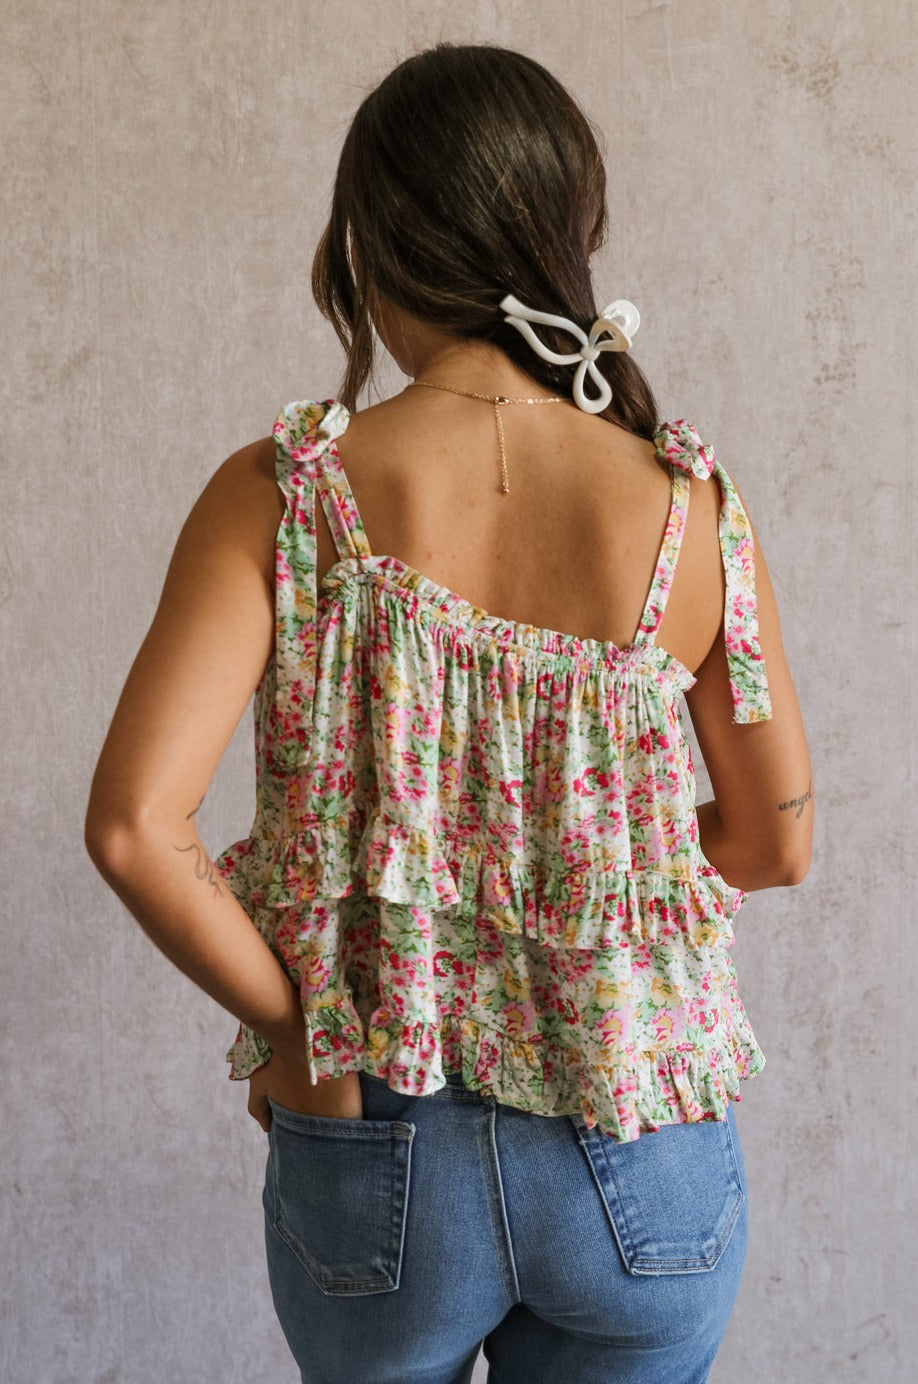 Back view of female model wearing the Florence Pink Multi Floral Tie Strap Tank which features features Pink, Yellow, Green and White Floral Print, Ruffle Tiered Details, Square Neckline and Tie Straps